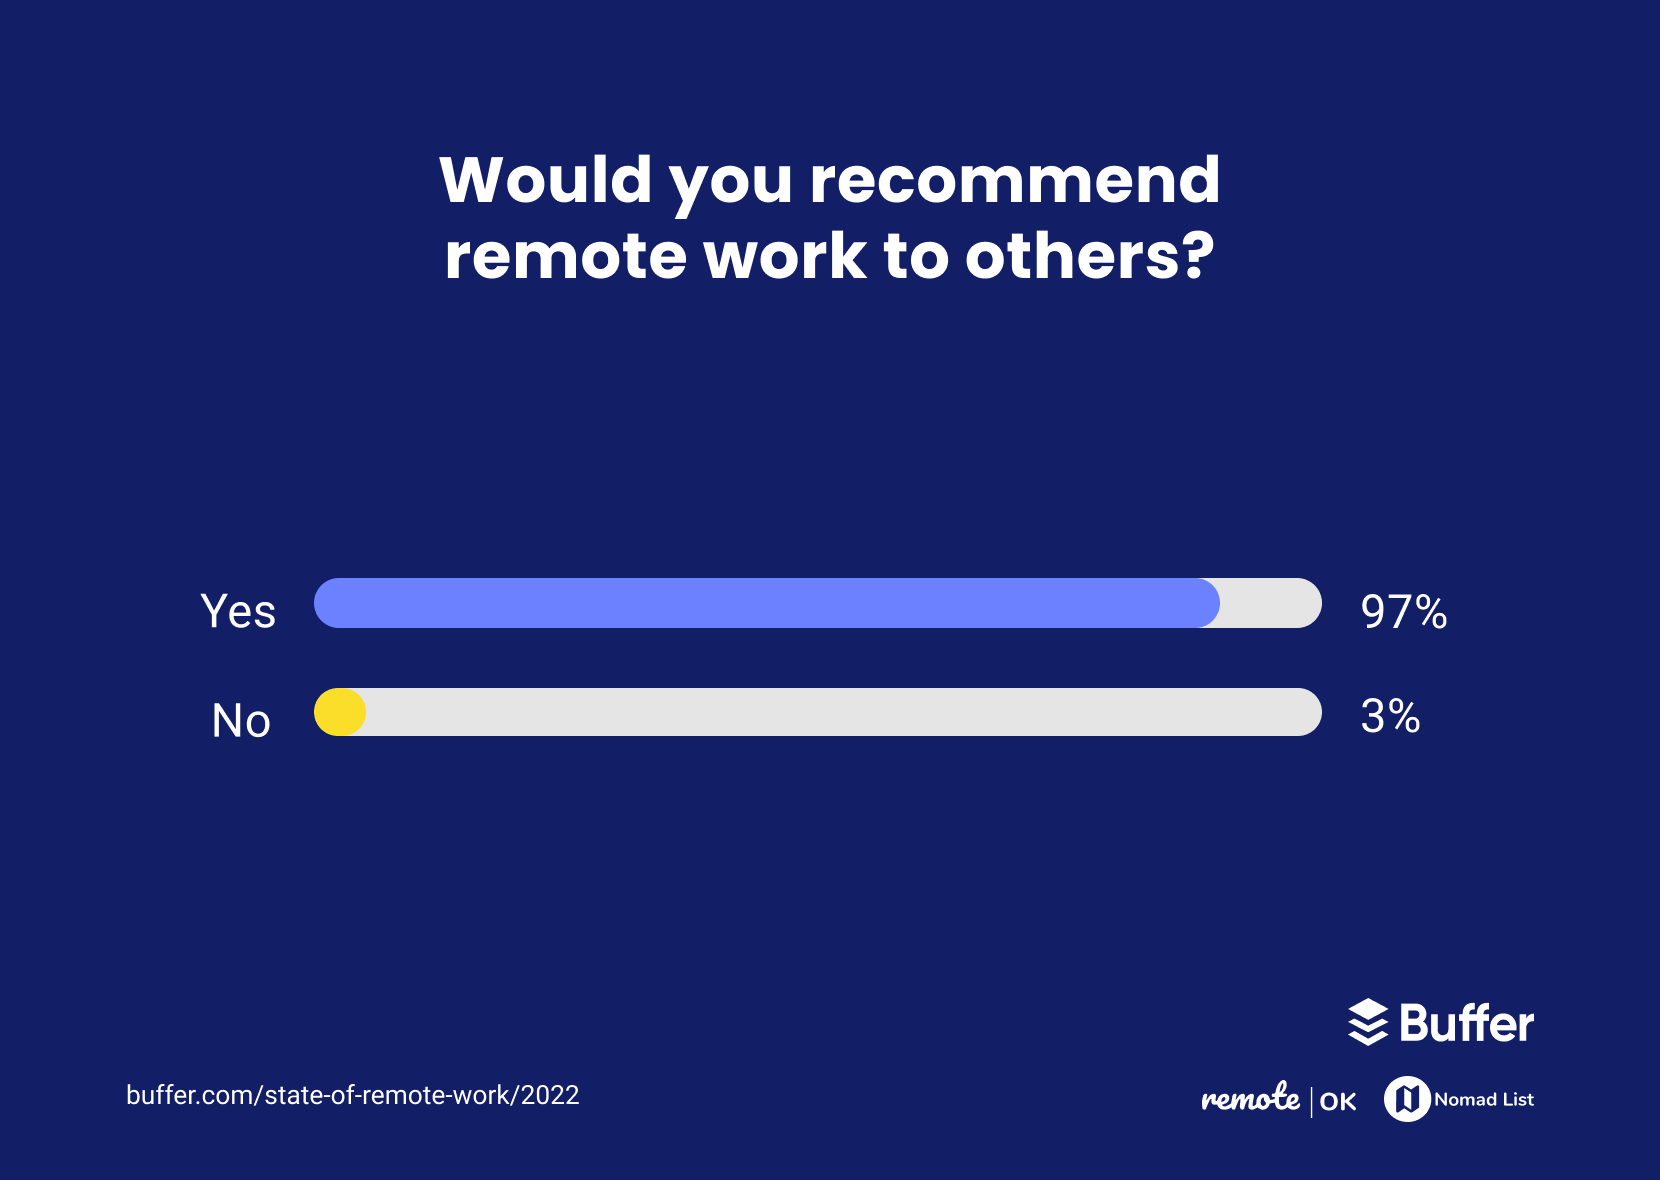 97% of people would recommend remote working